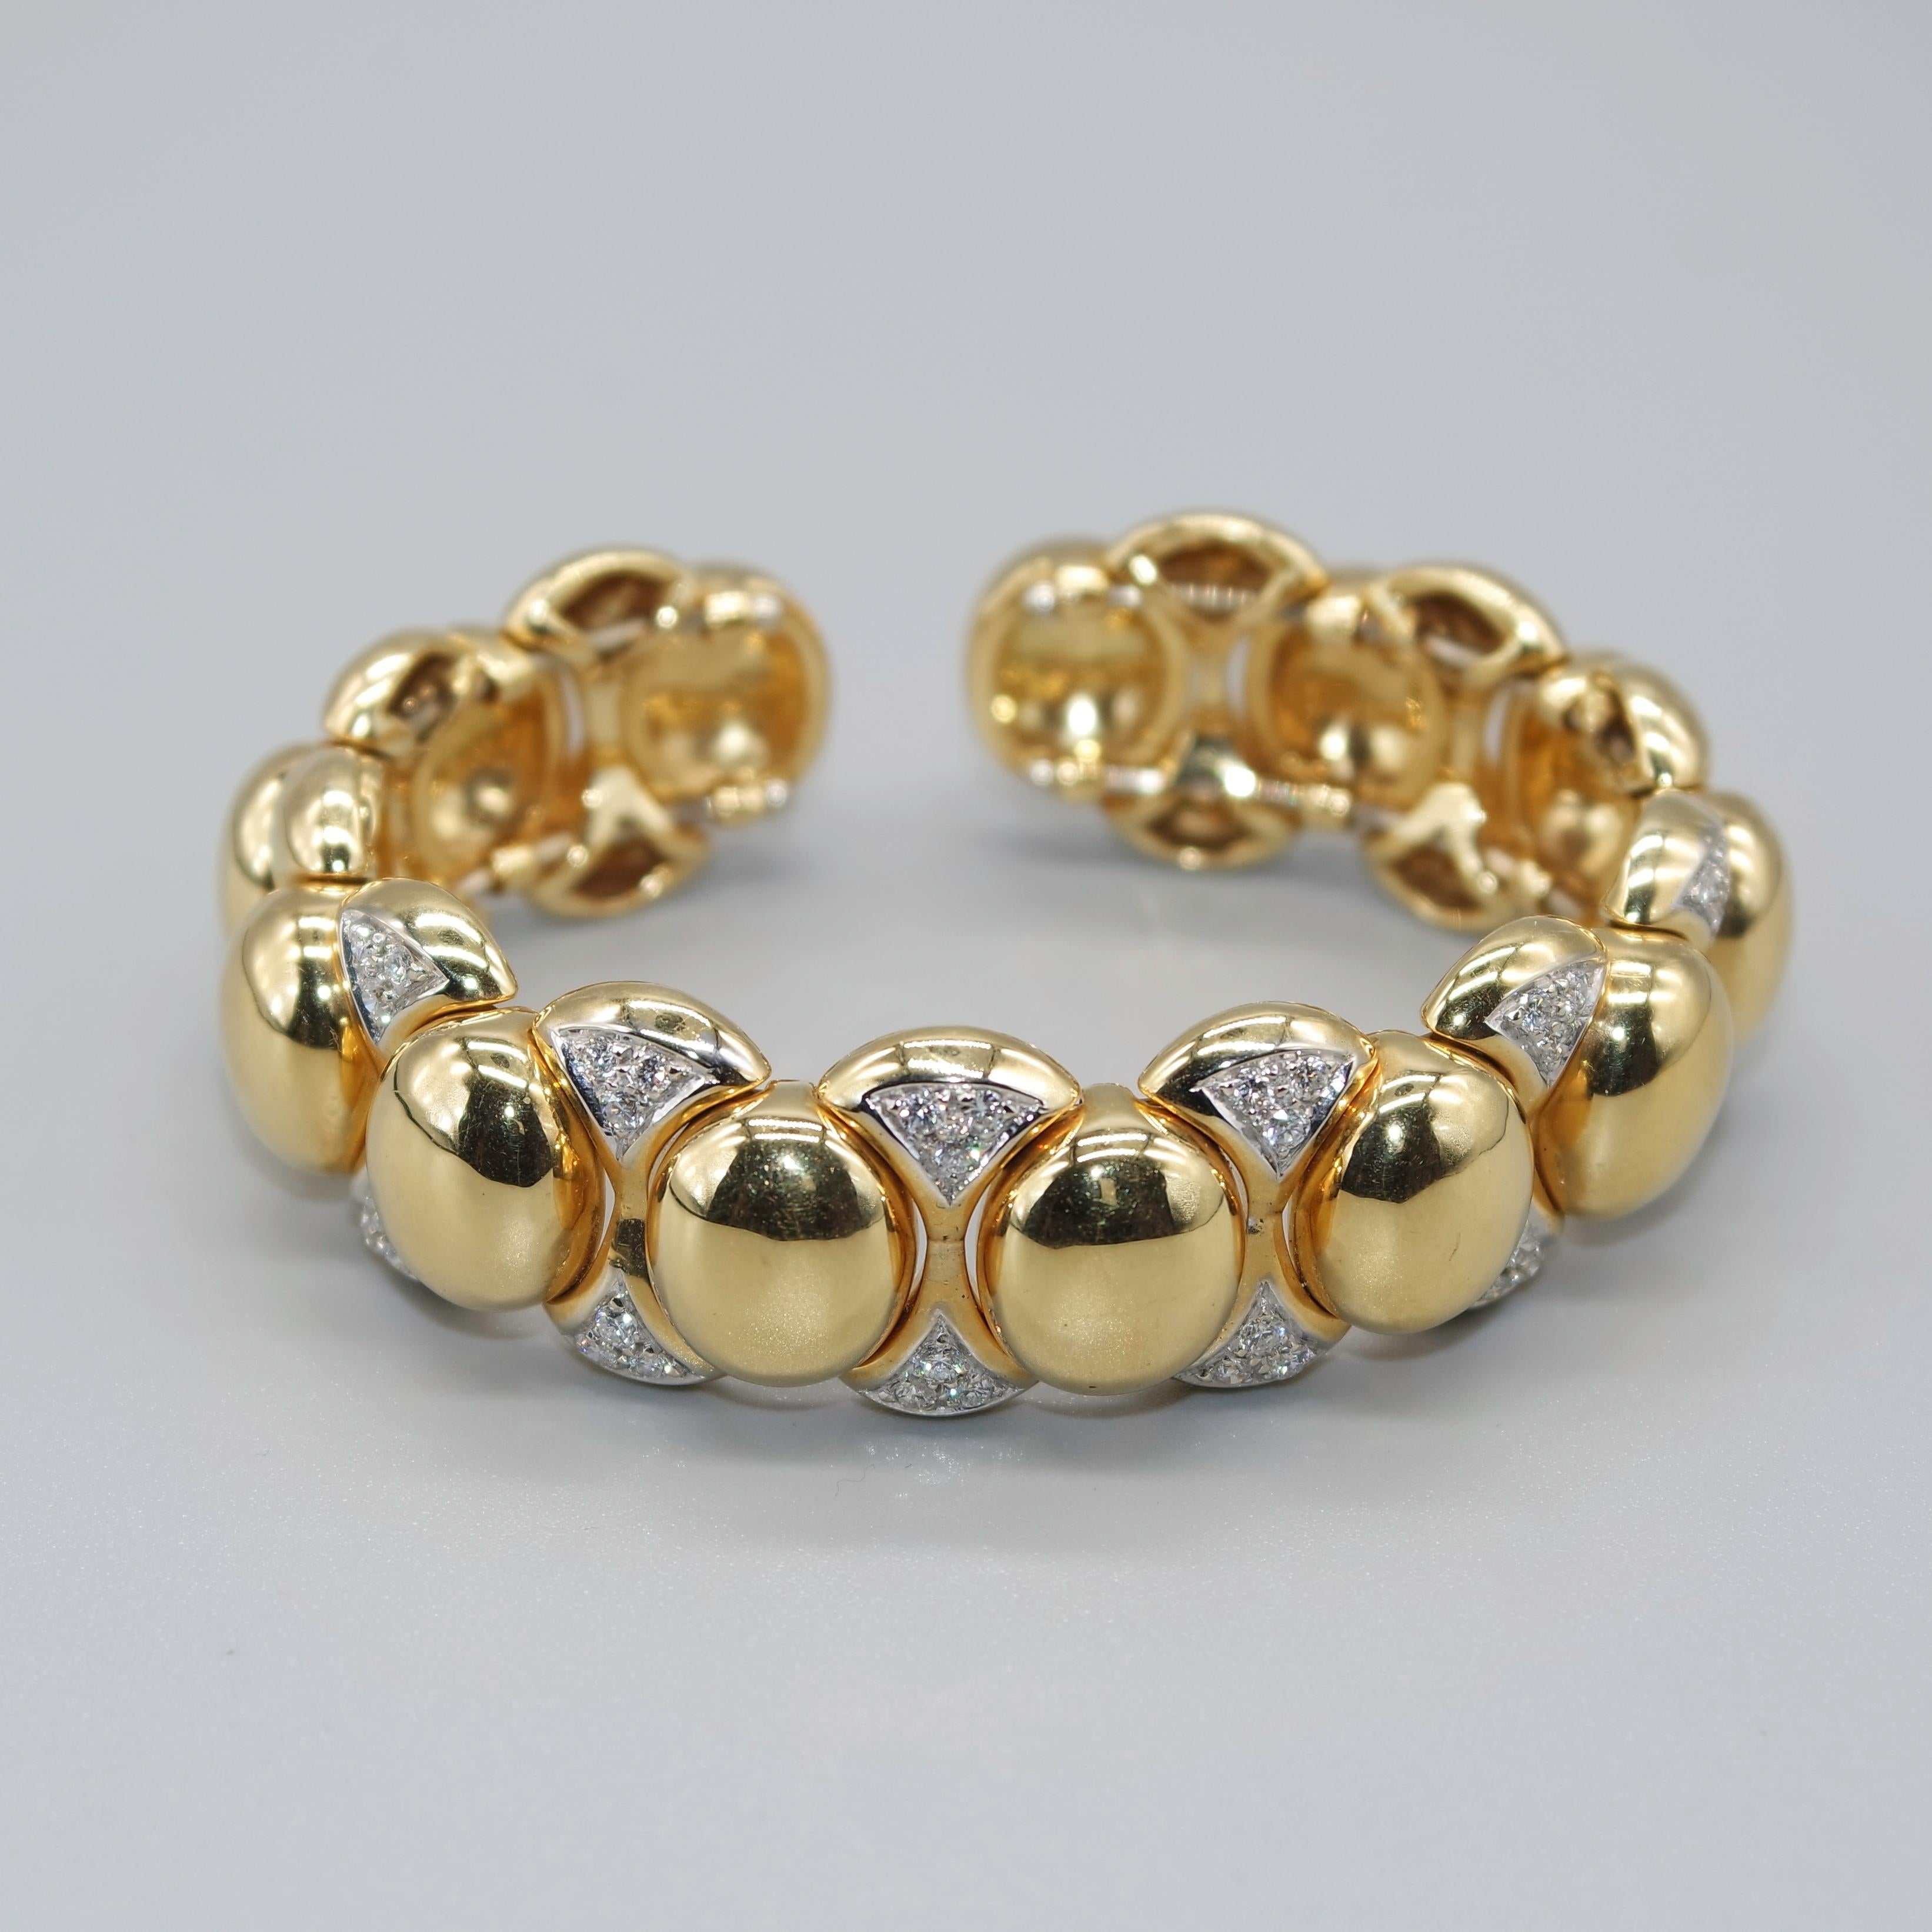 18 Karat yellow and white gold cuff bracelet magnifically ellaborated and made in the pure Italian craftsmanship tradition.
Easy to put on and off thanks to an additional  light elasticity allowed by the internal structure. Its oval shape has